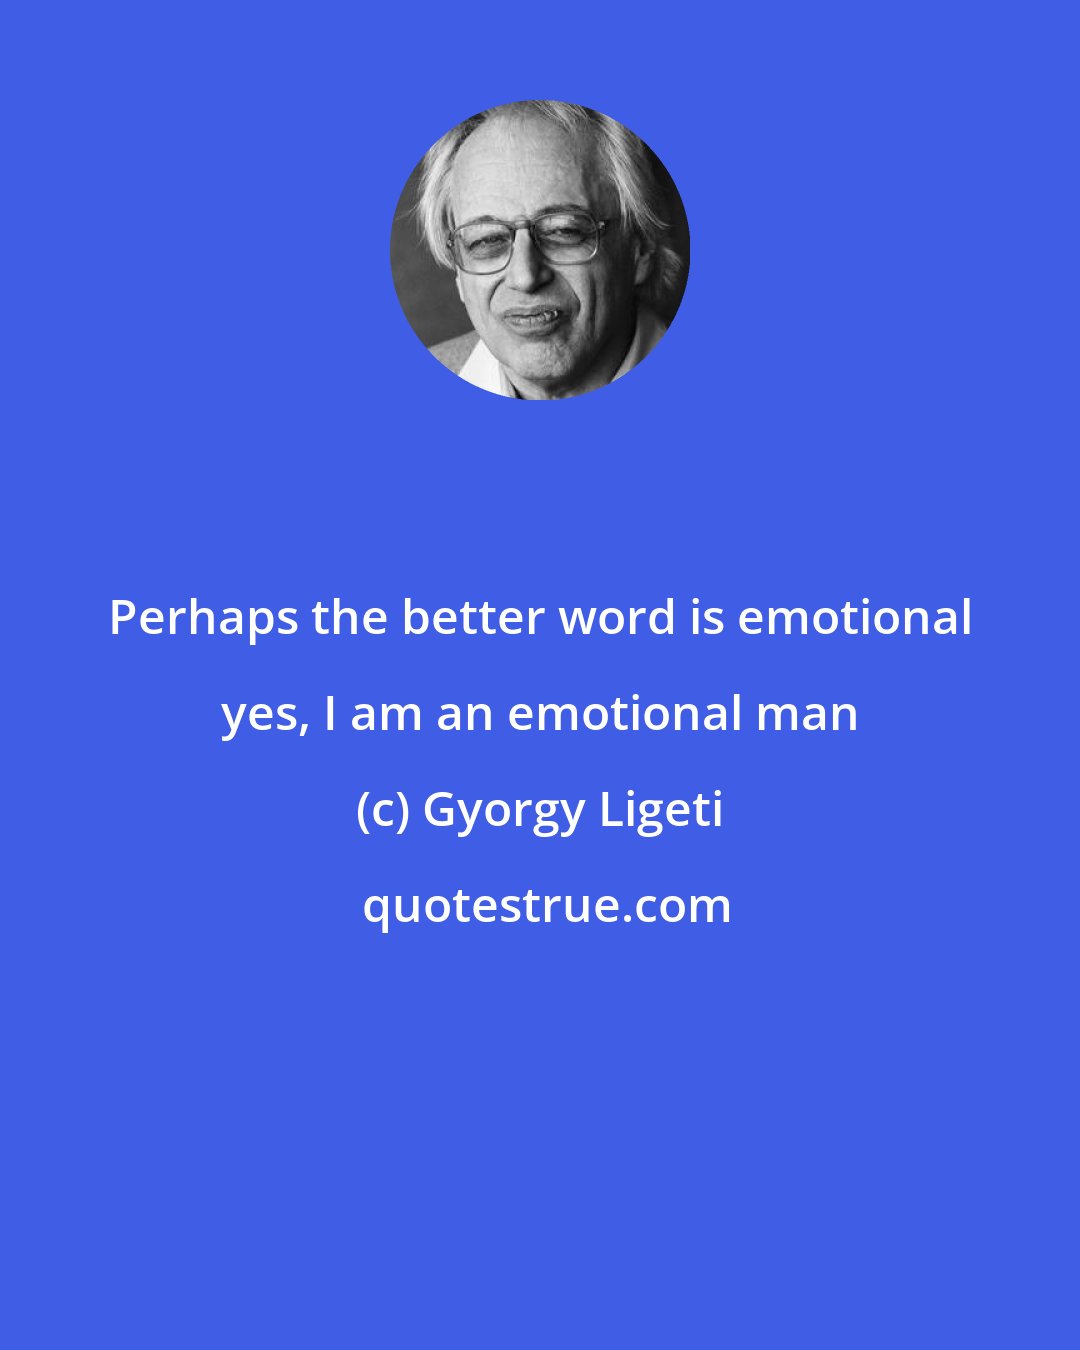 Gyorgy Ligeti: Perhaps the better word is emotional yes, I am an emotional man